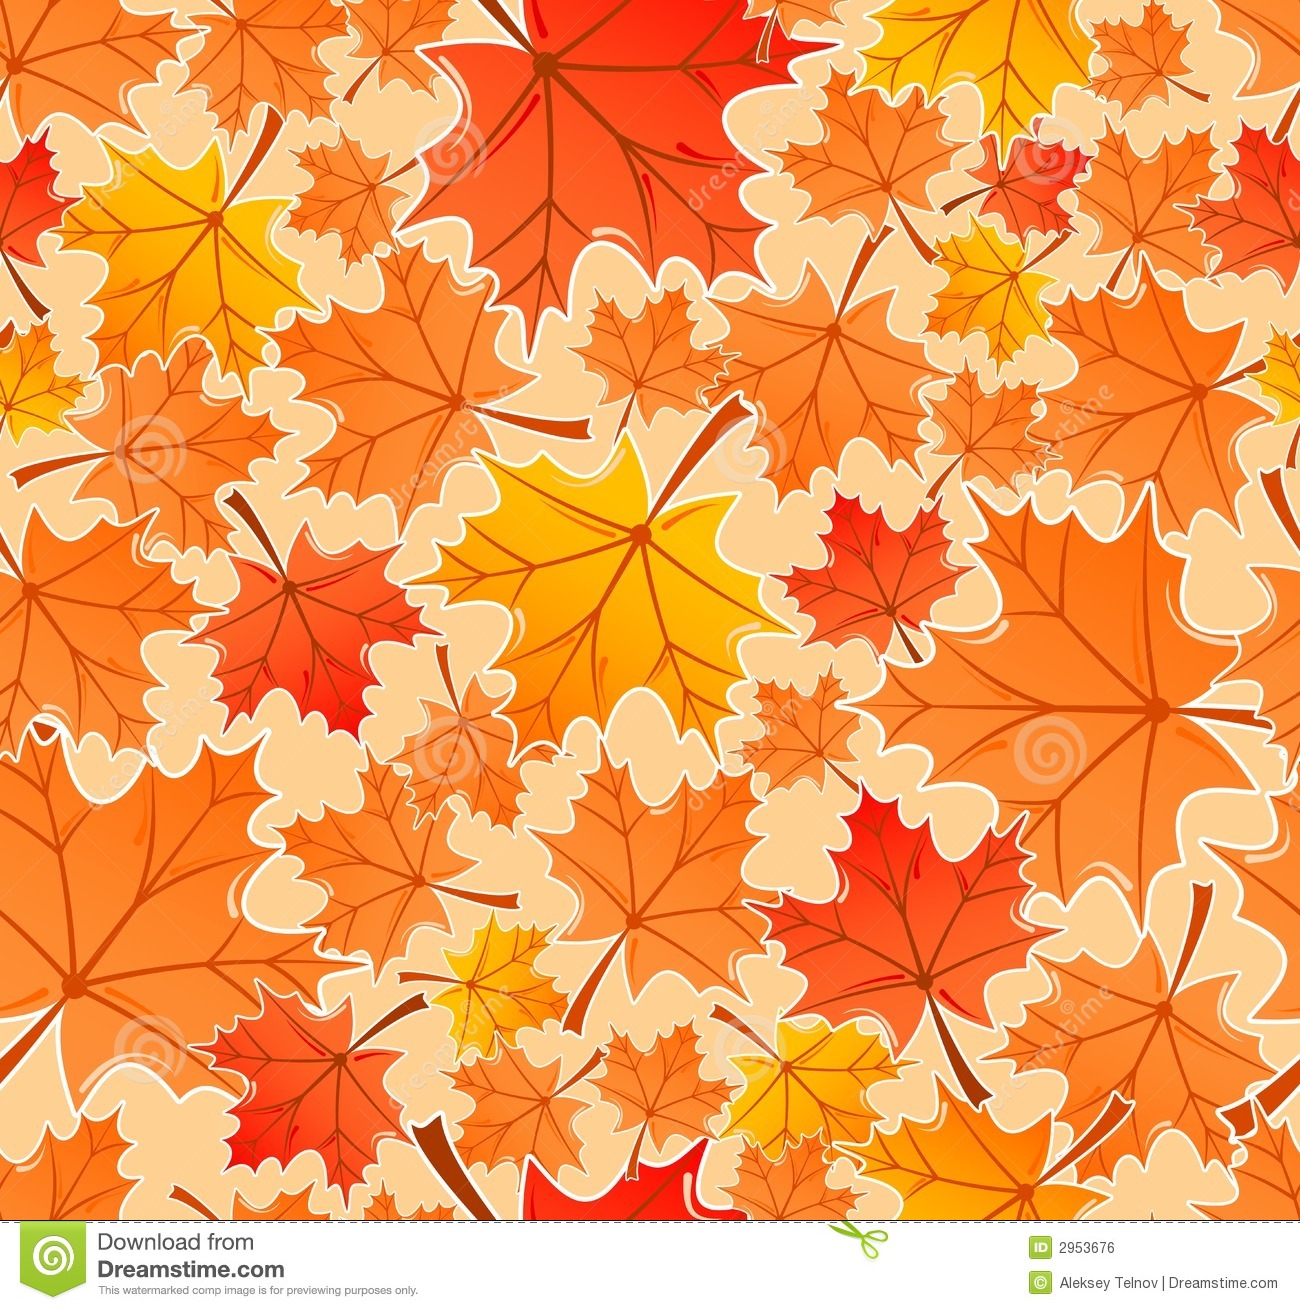 Autumn Fall Leaves Patterns